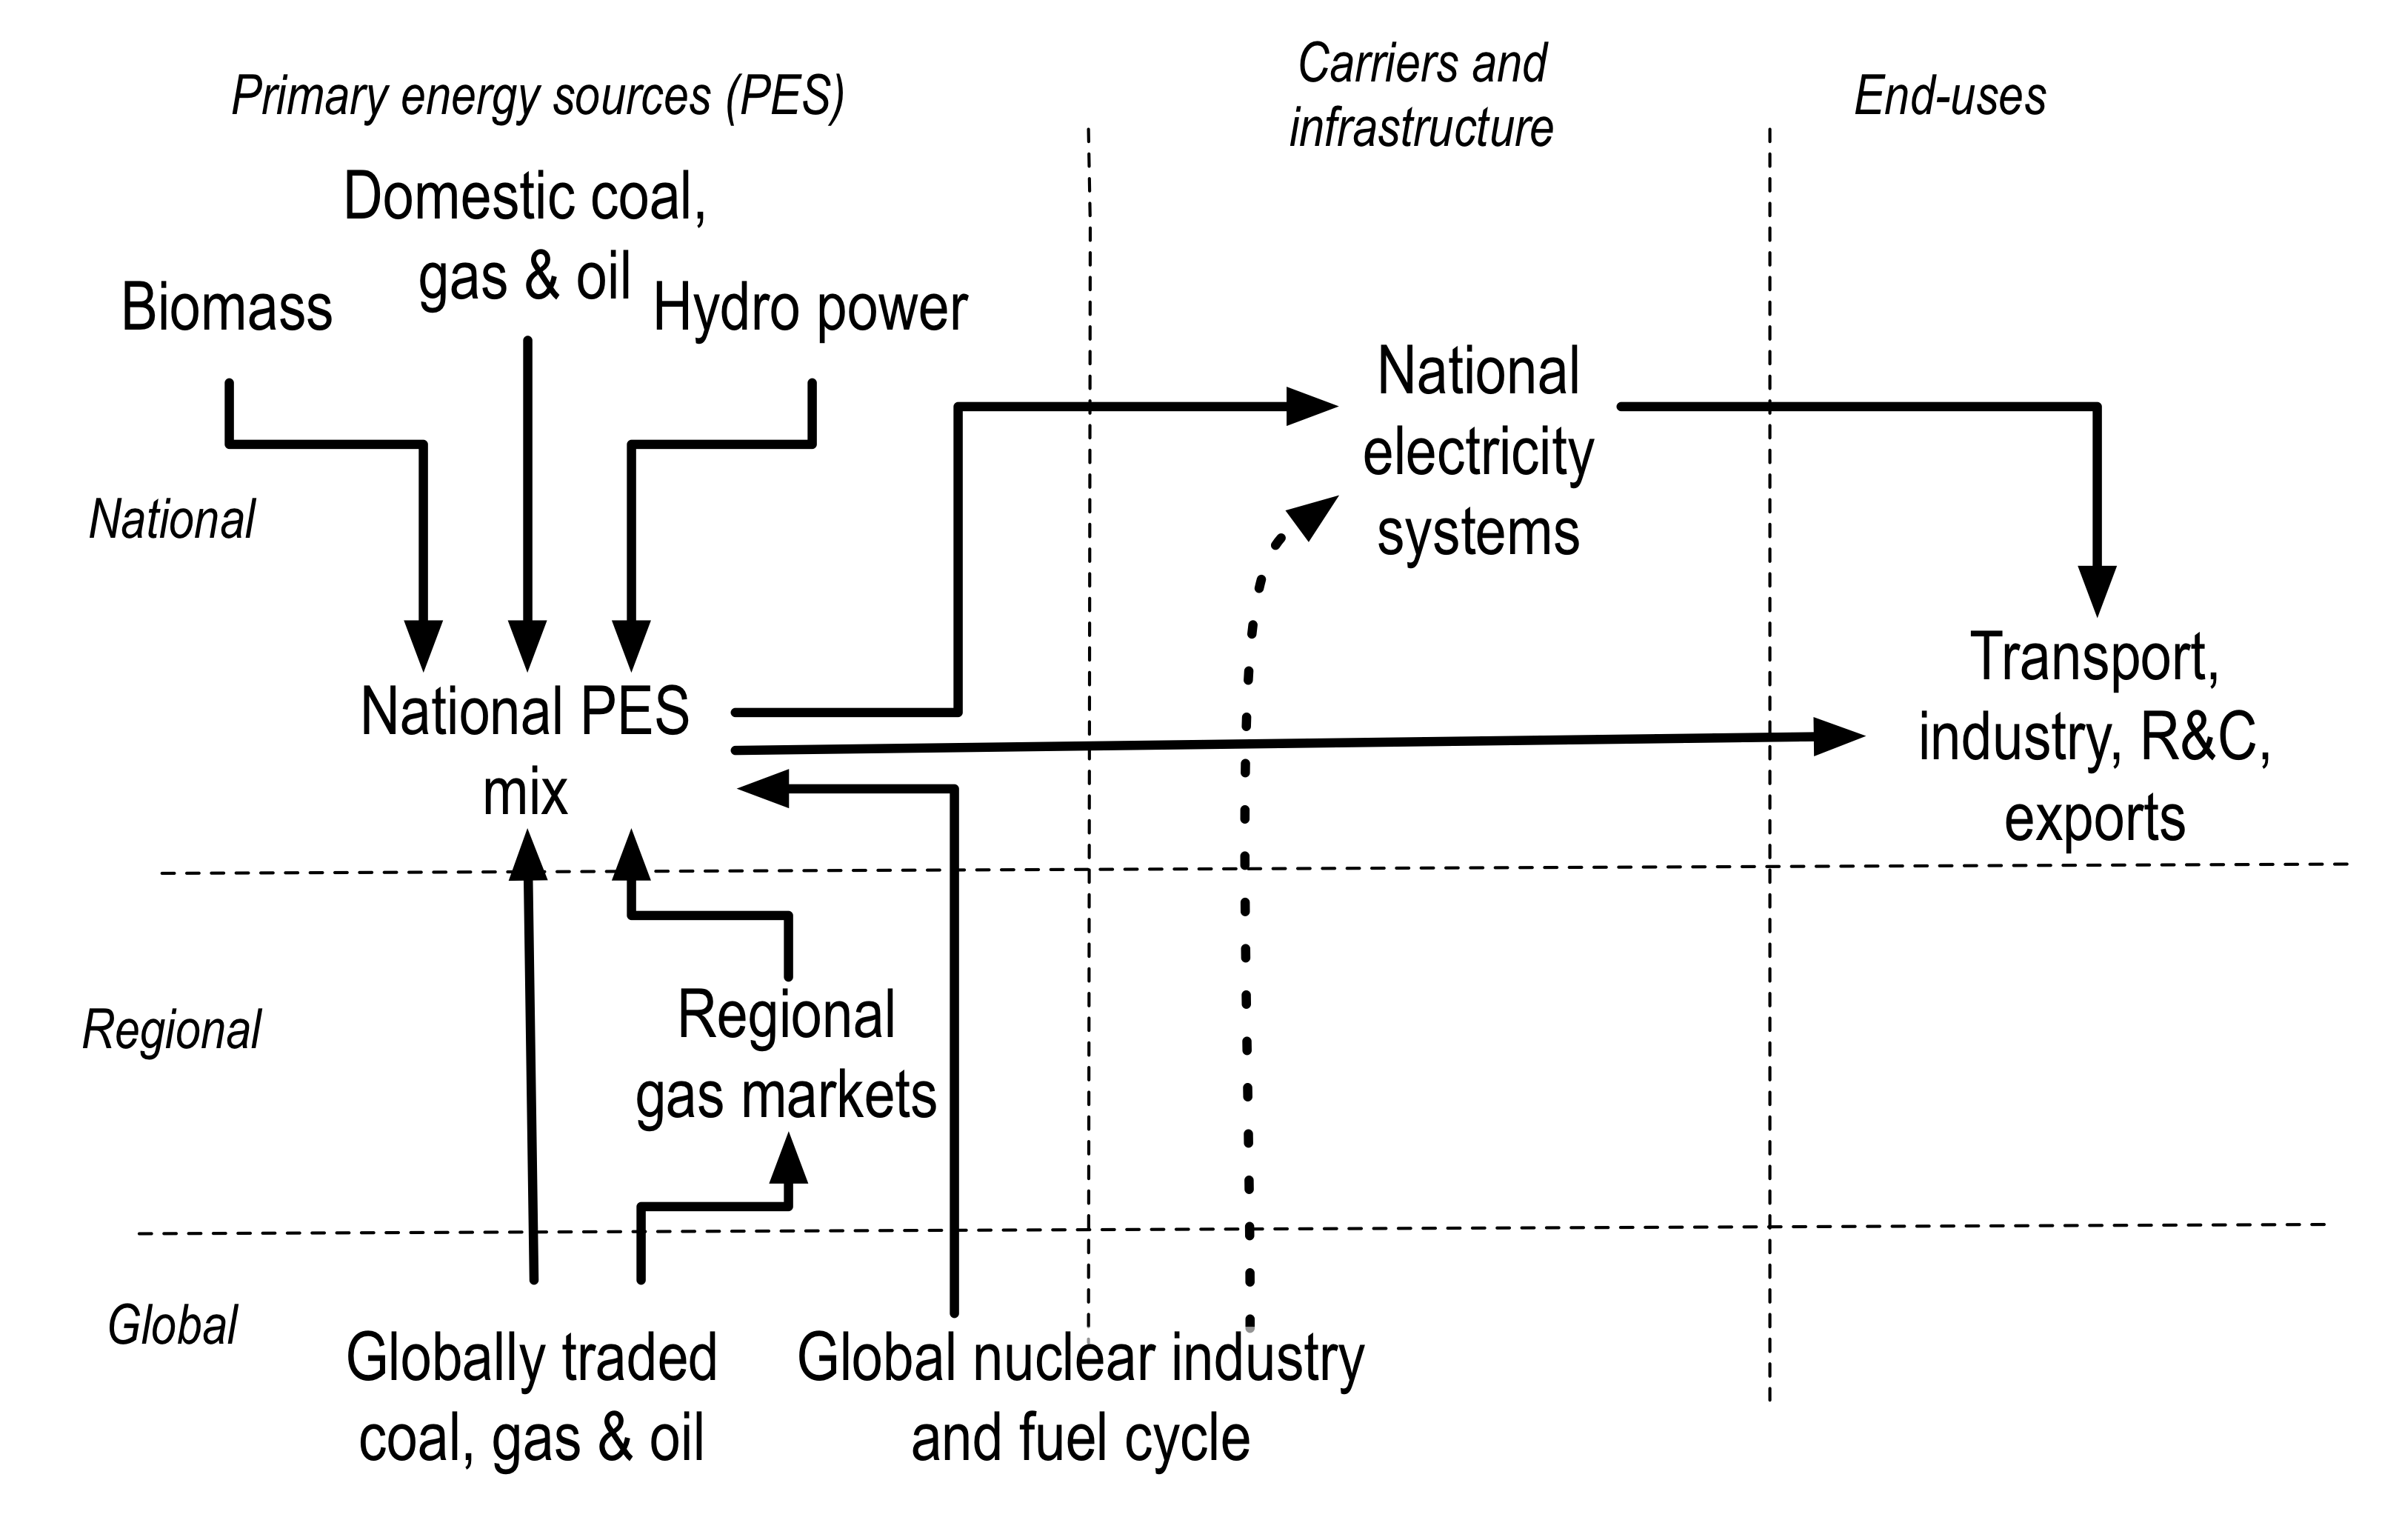 energy-systems-in-gea-for-psj-121012.png